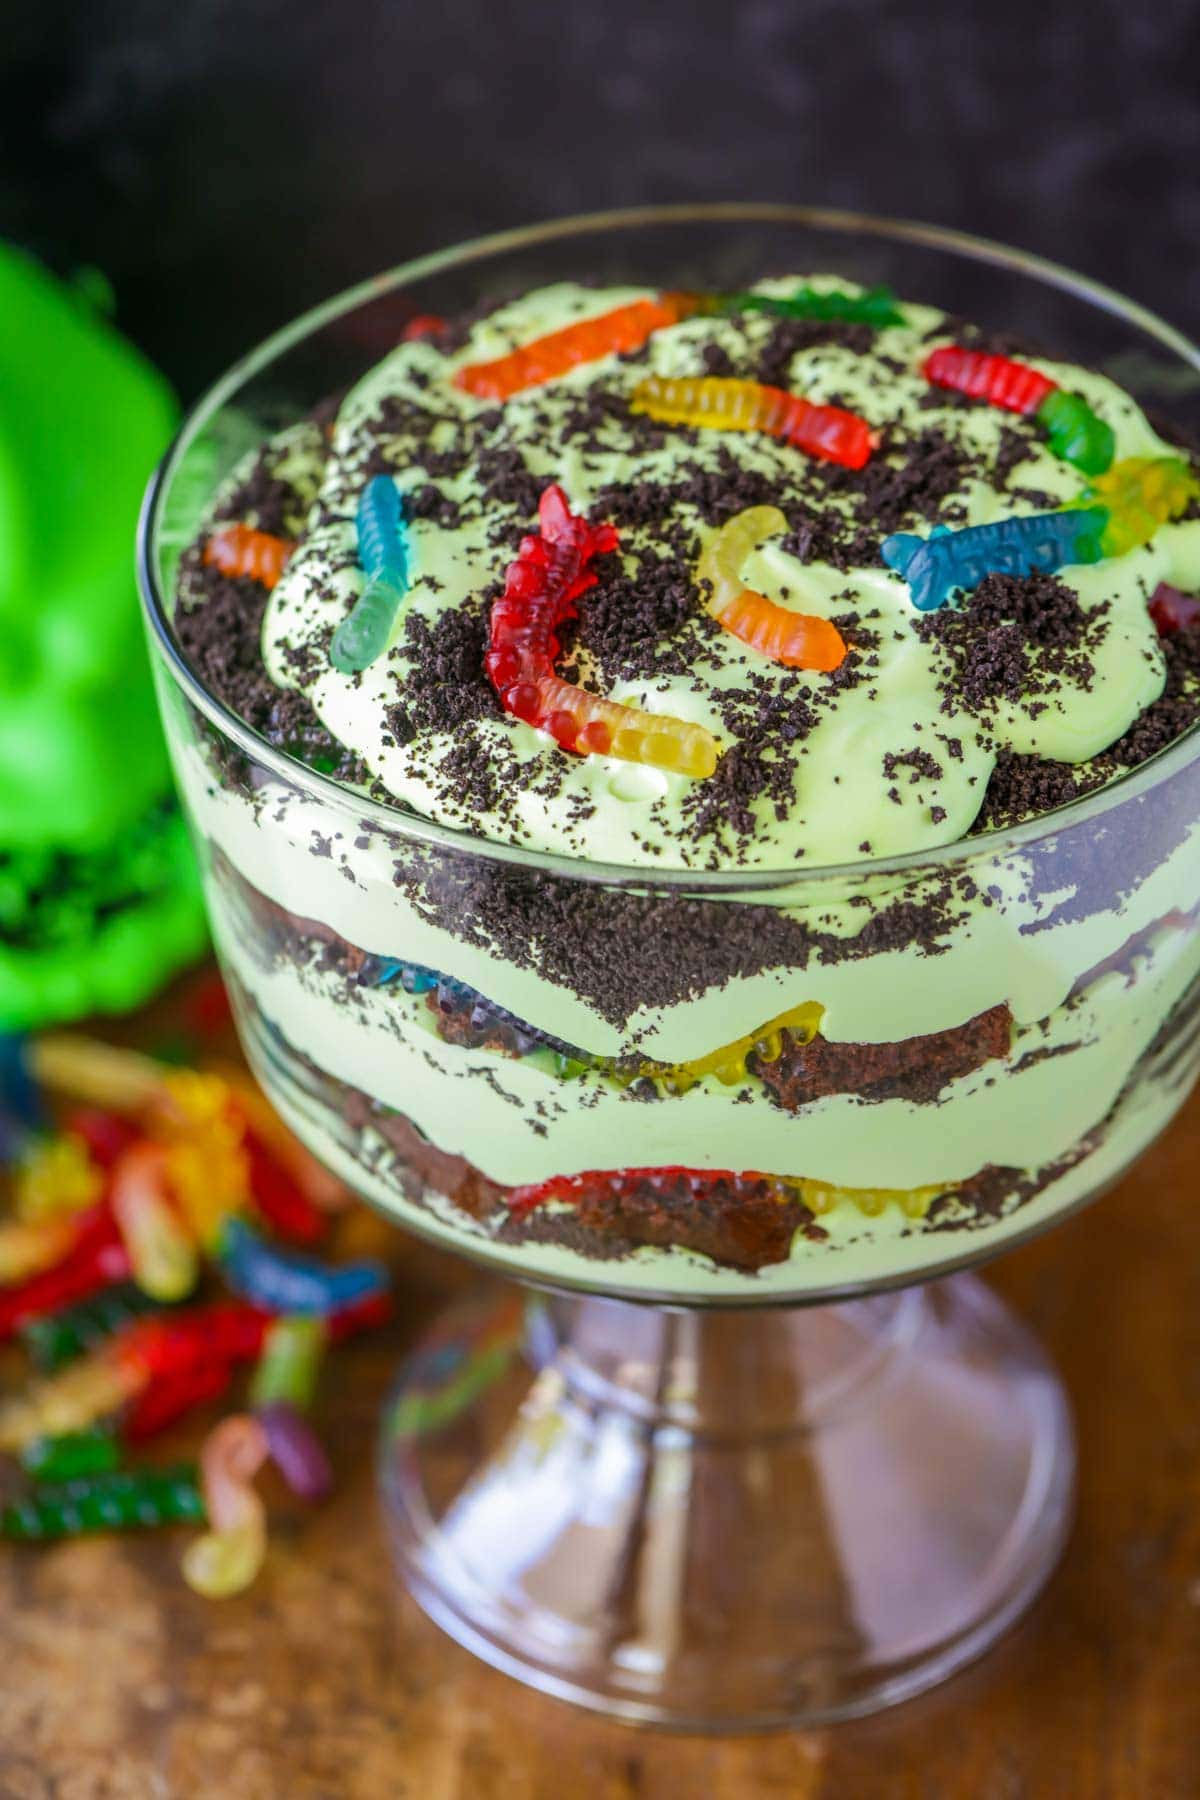 Oogie Boogie Trifle recipe